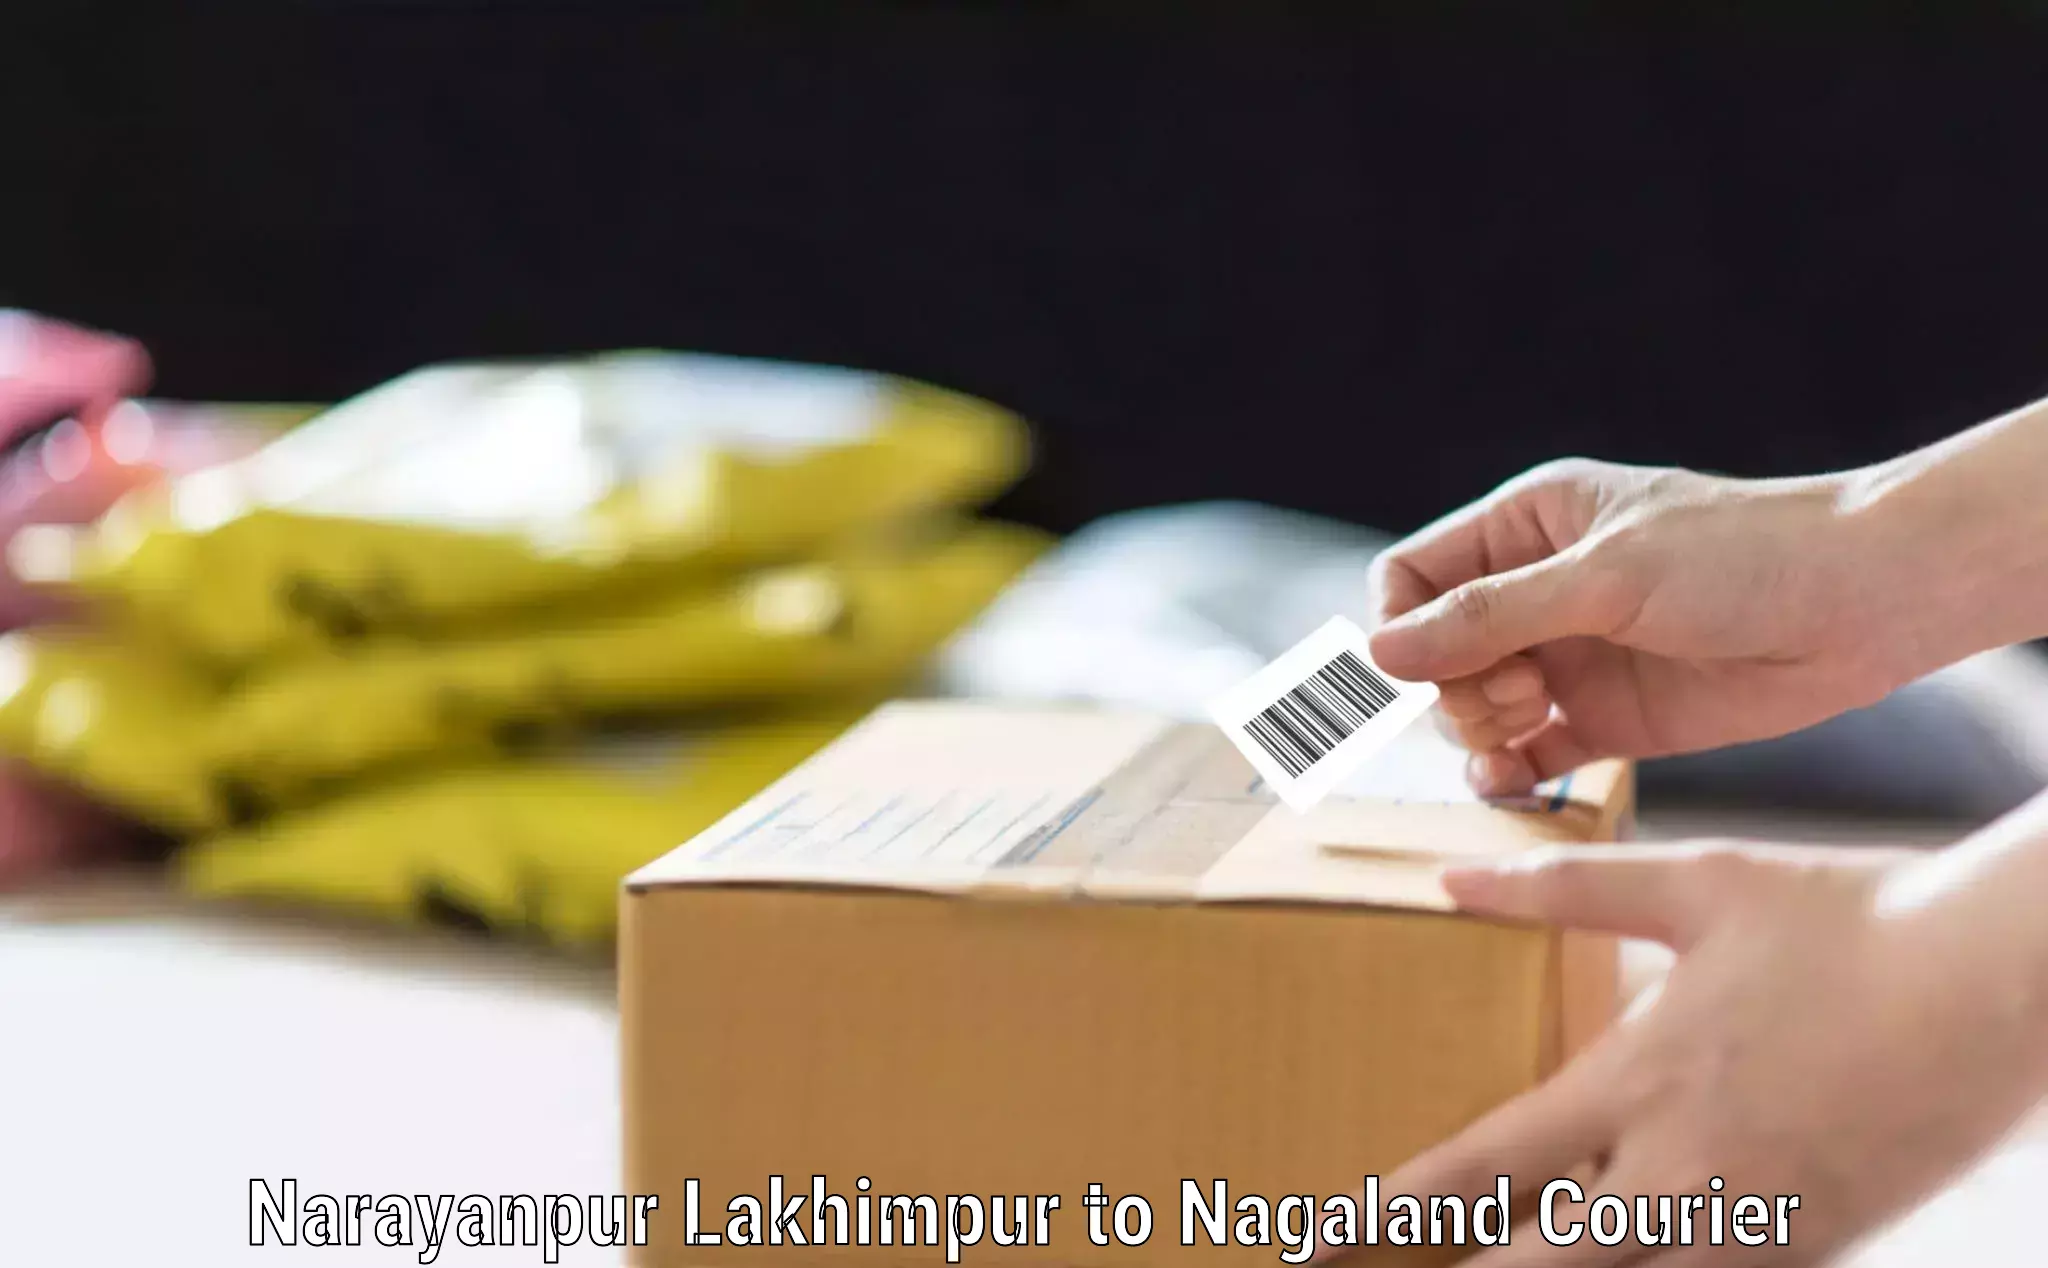 Luggage storage and delivery Narayanpur Lakhimpur to Nagaland